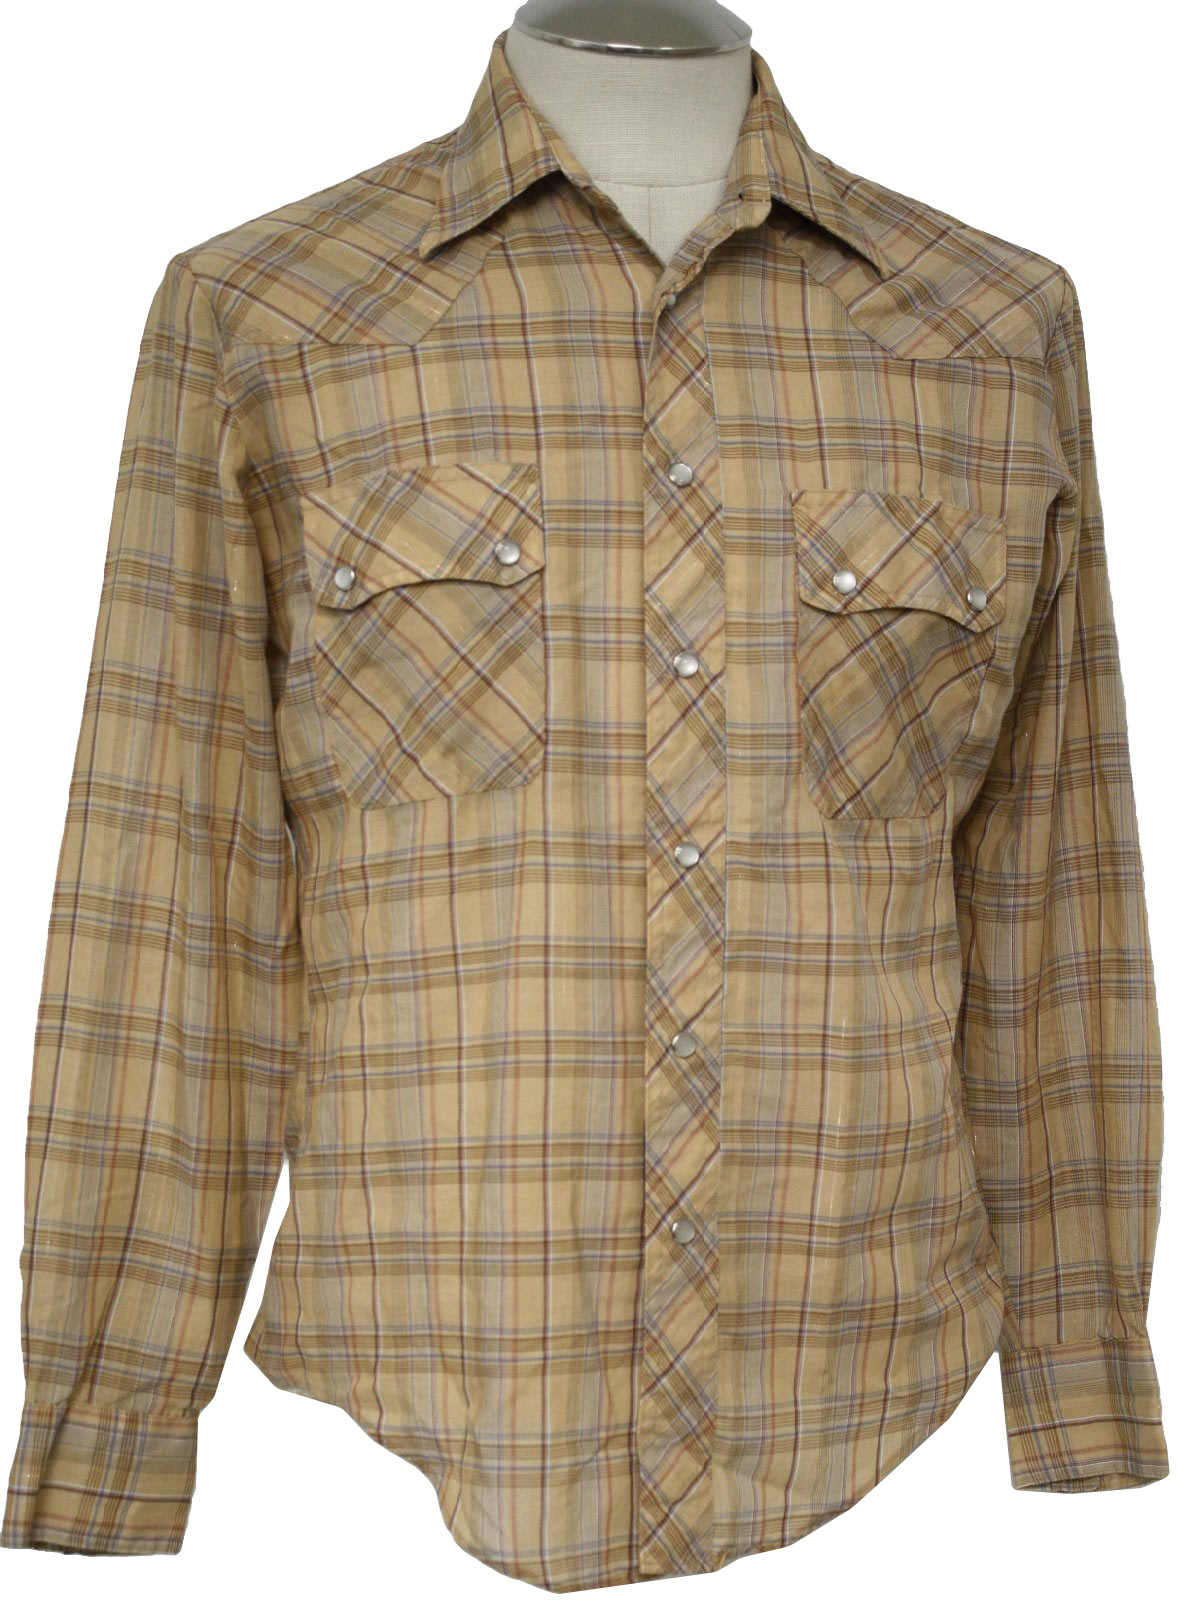 Vintage National shirt 1970s Western Shirt: Late 70s or early 80s ...